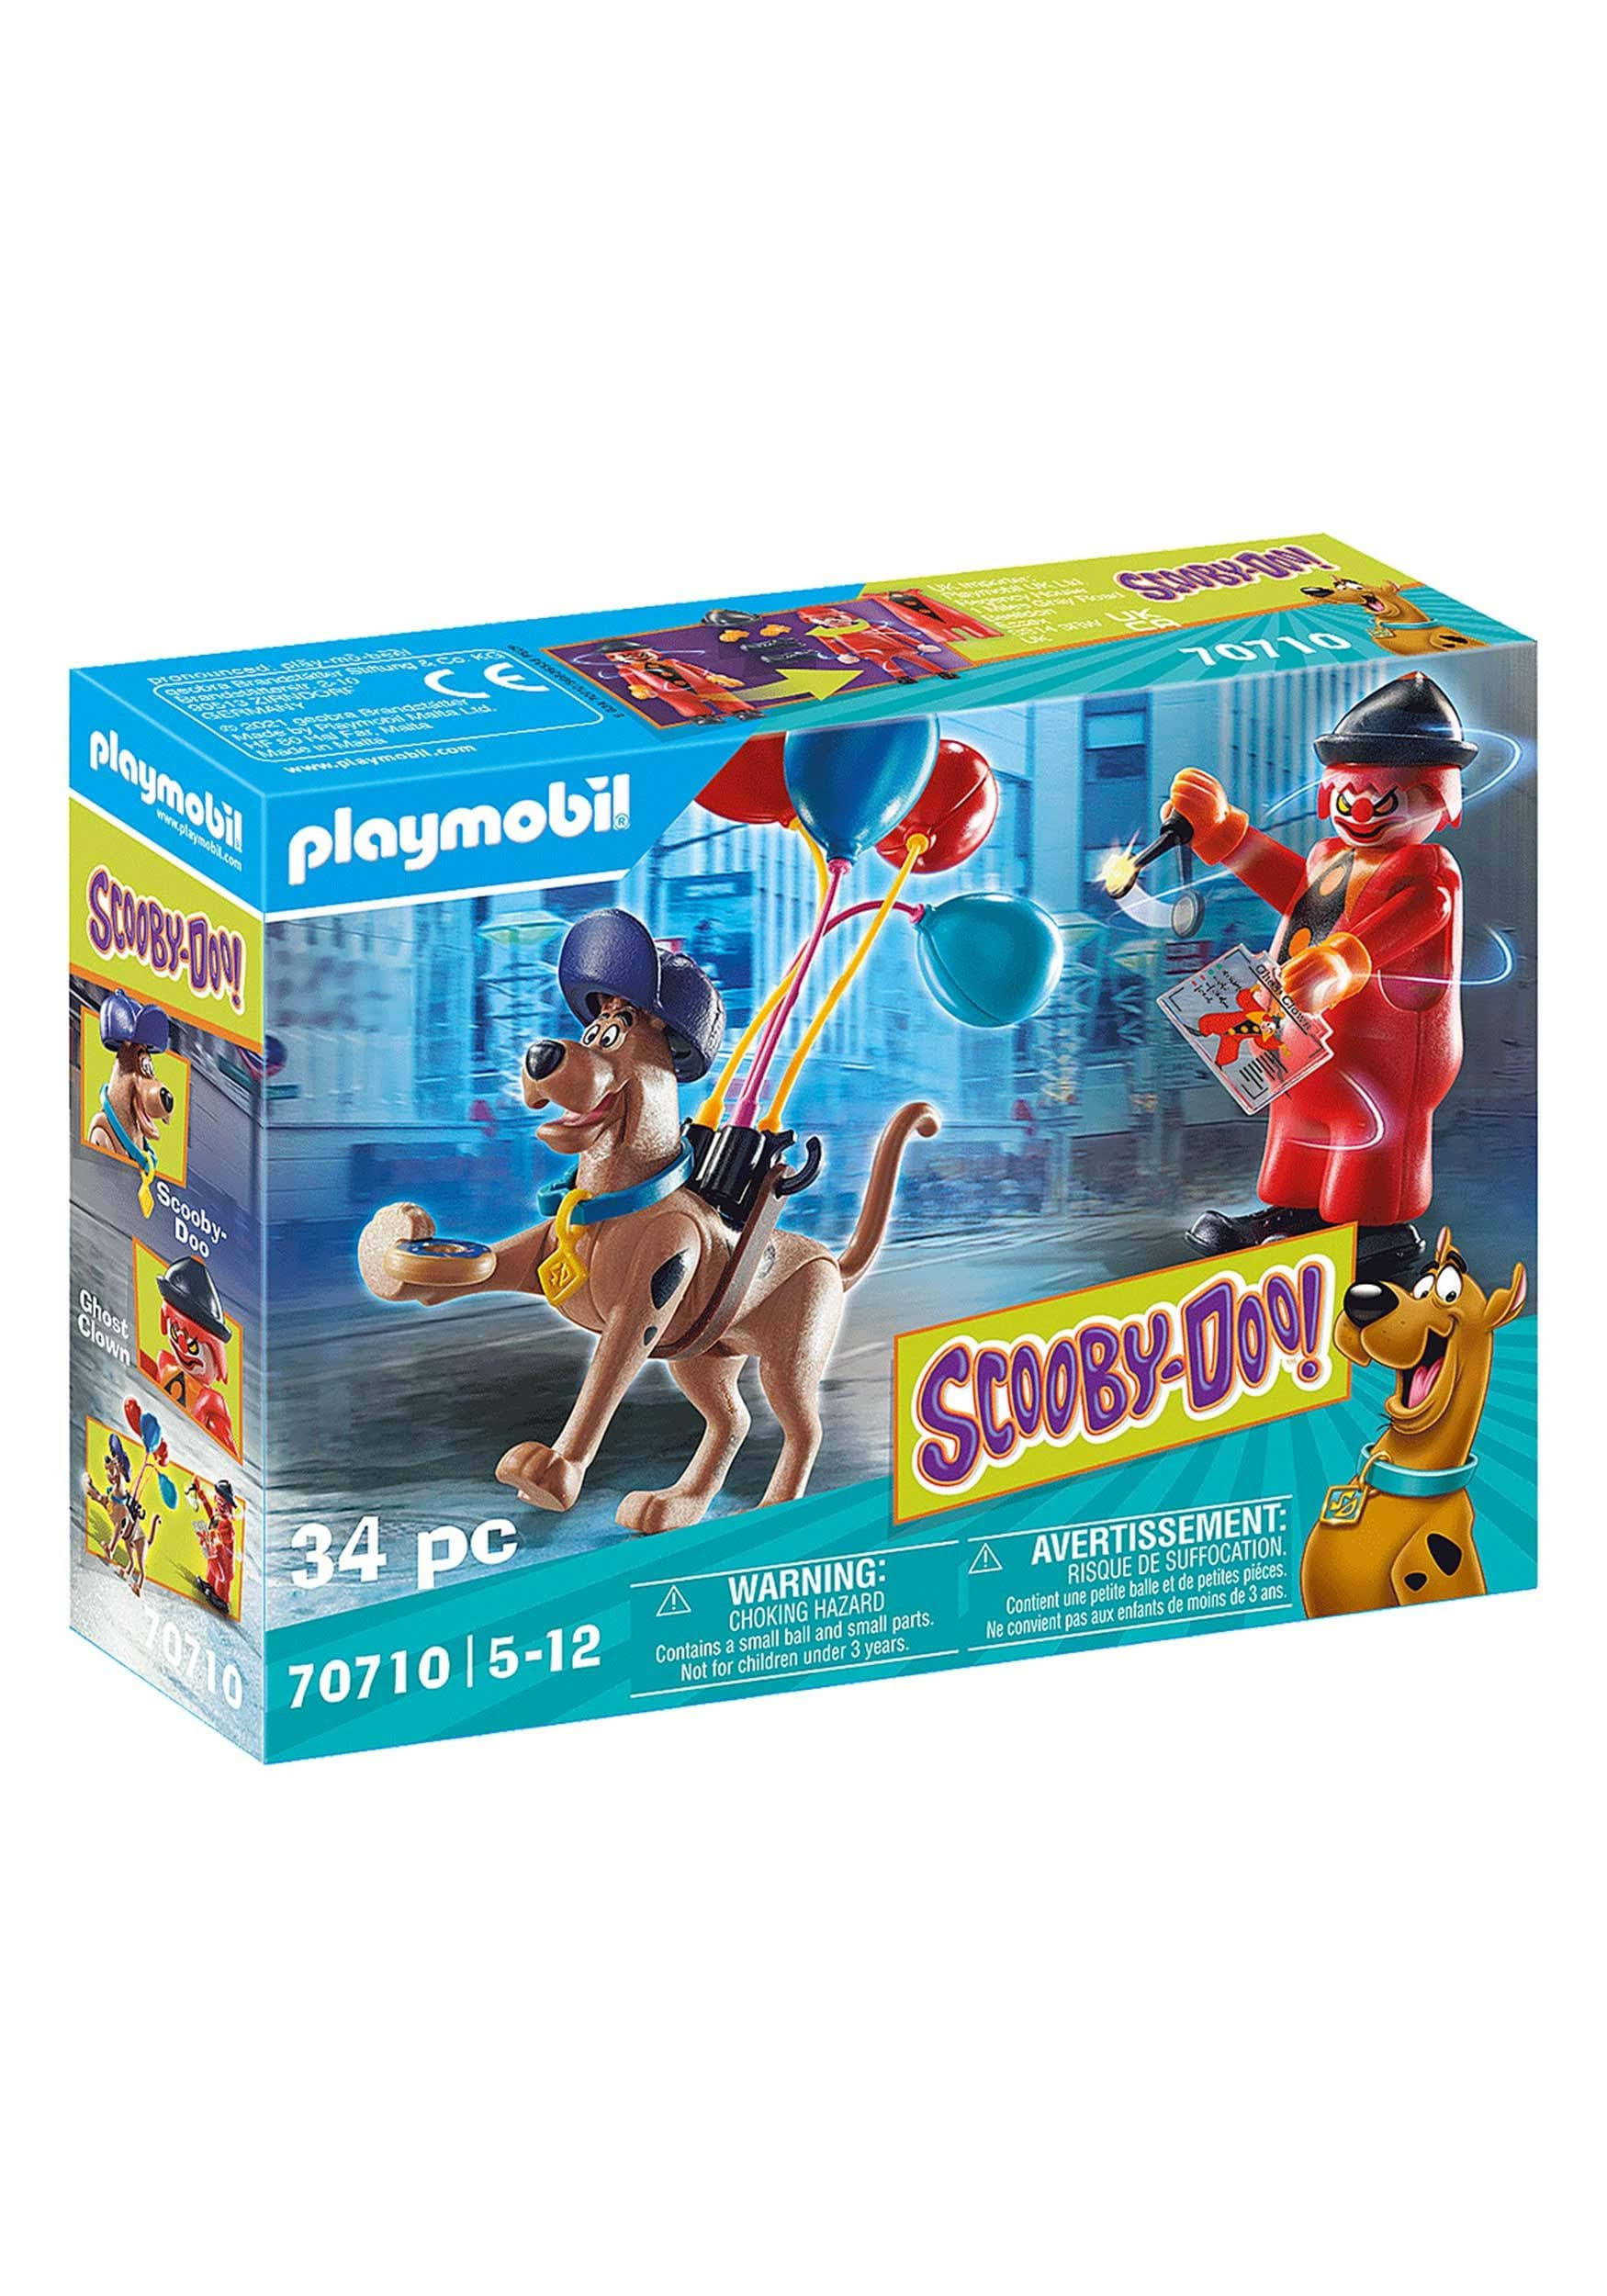 Playmobil - Scooby-Doo! Adventure with Ghost Clown